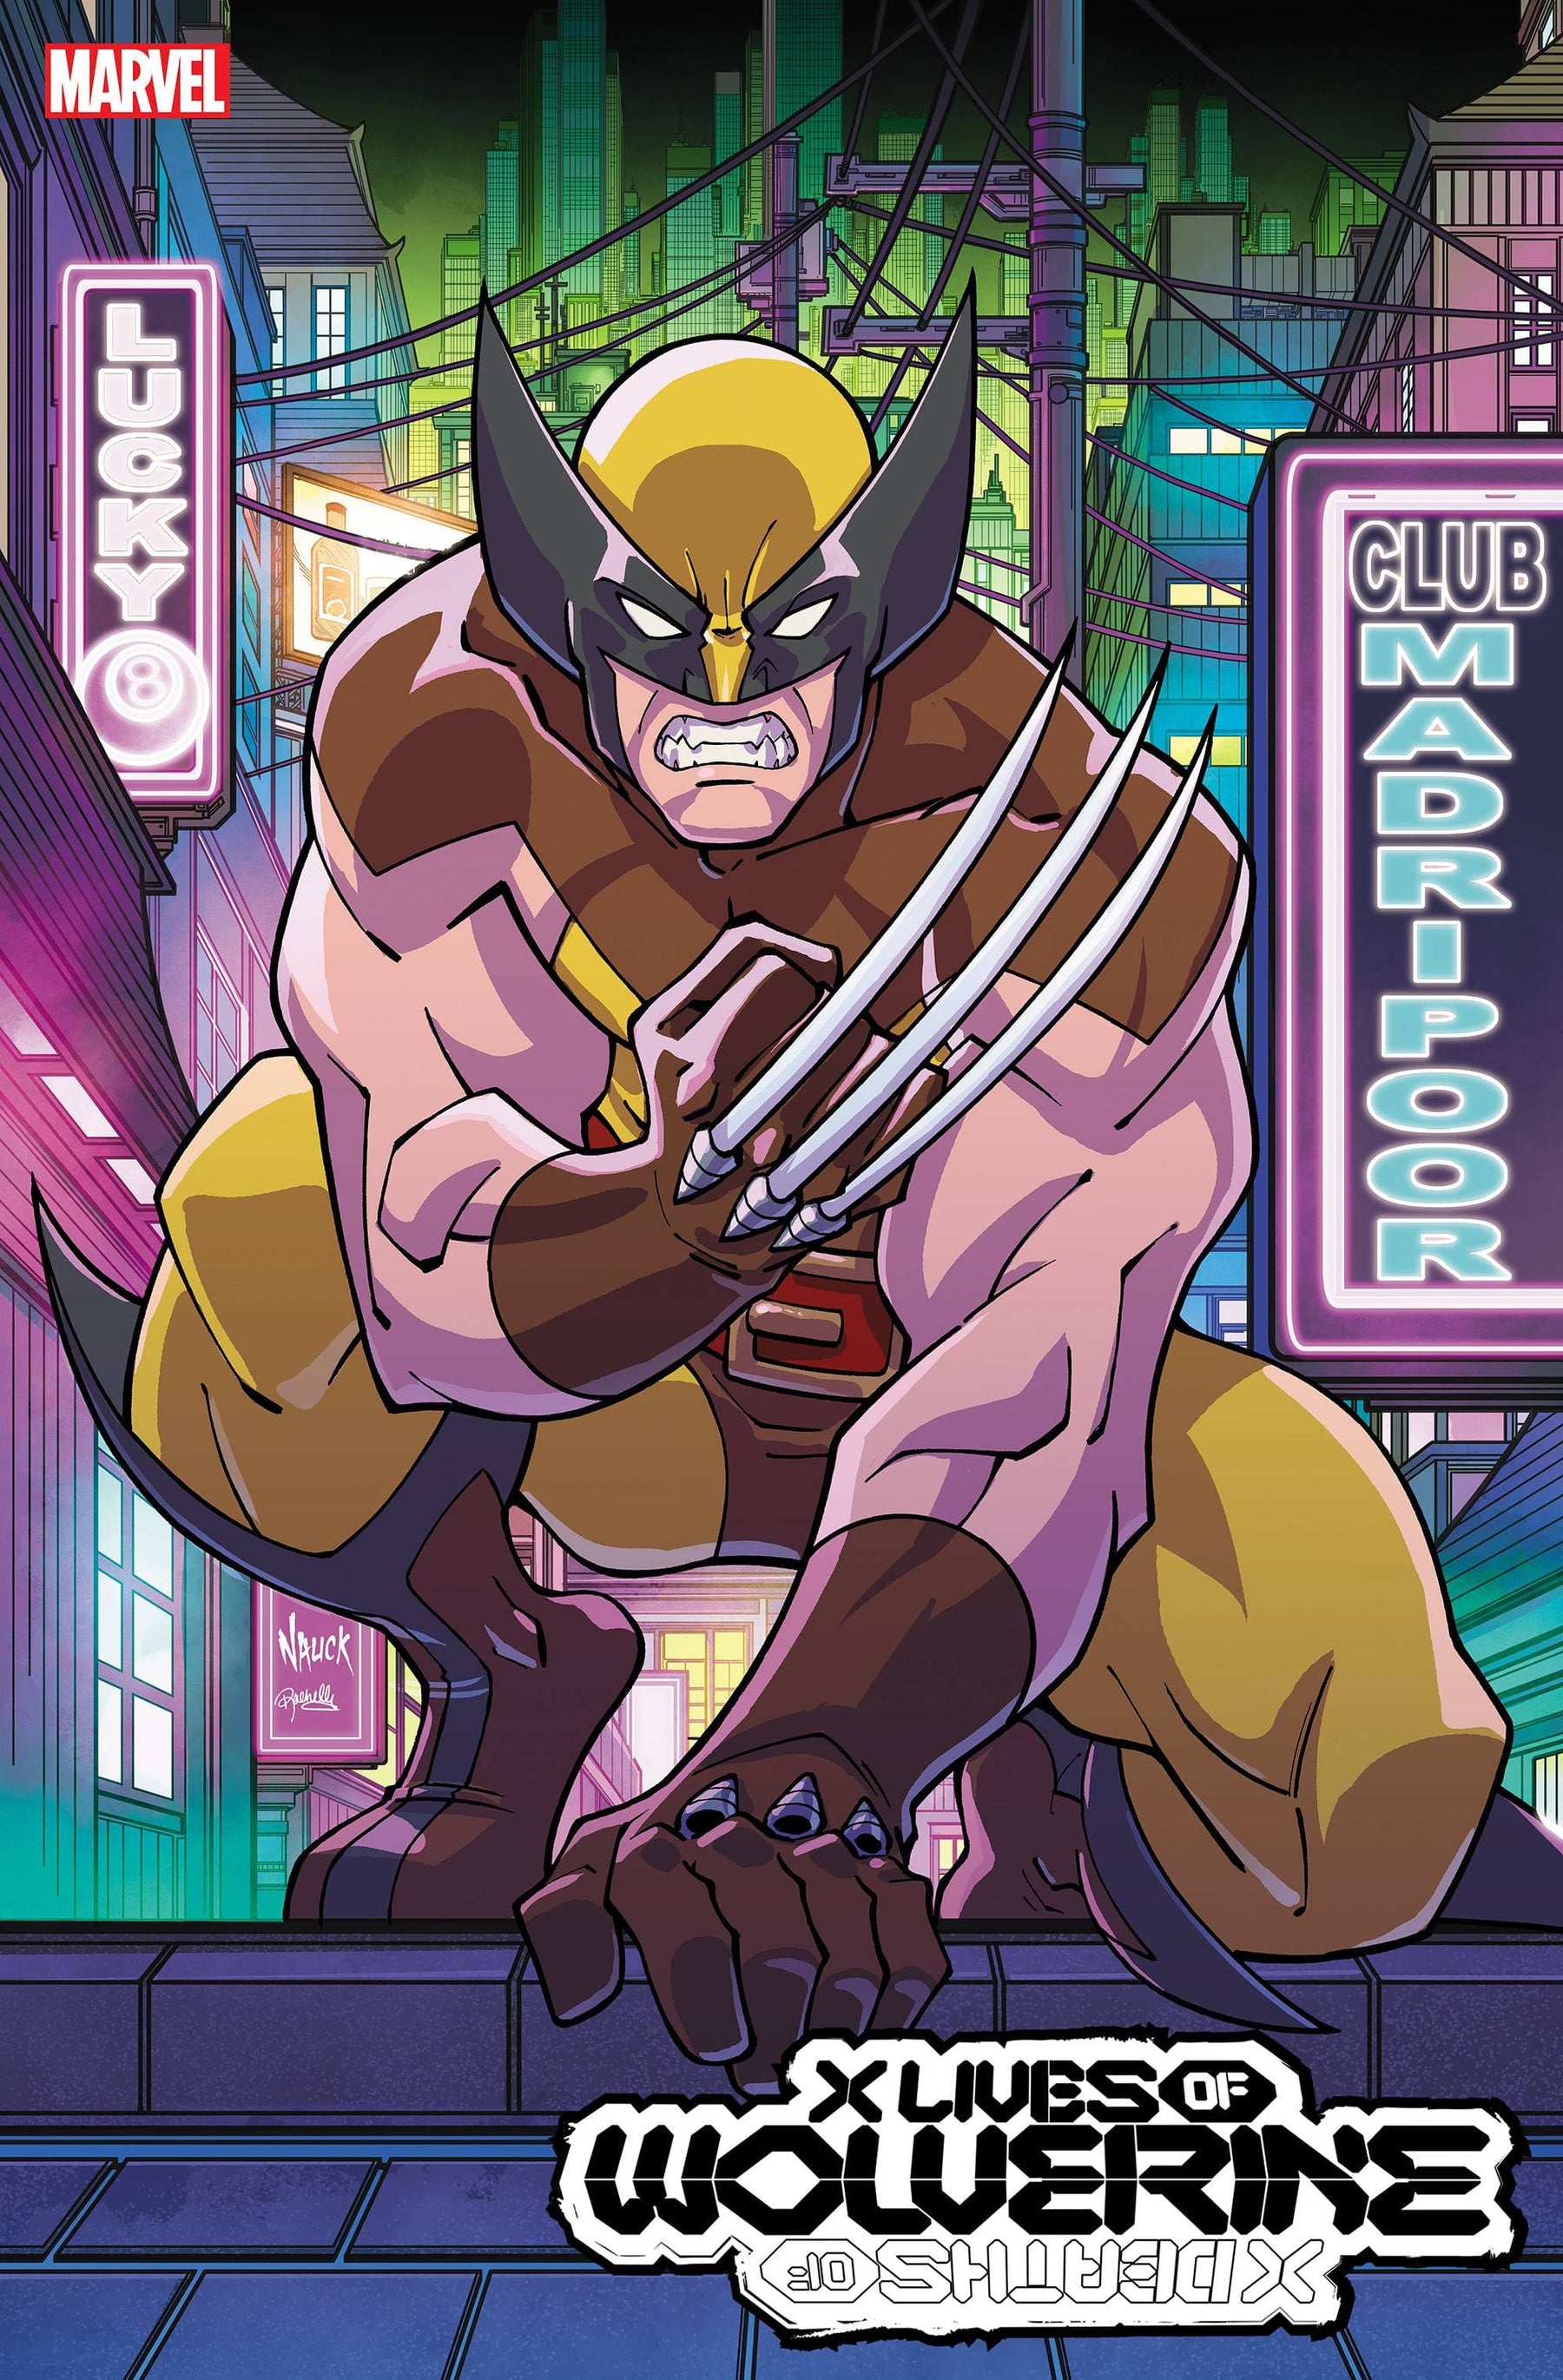 X LIVES OF WOLVERINE #1 1:25 NAUCK ANIMATION STYLE VARIANT